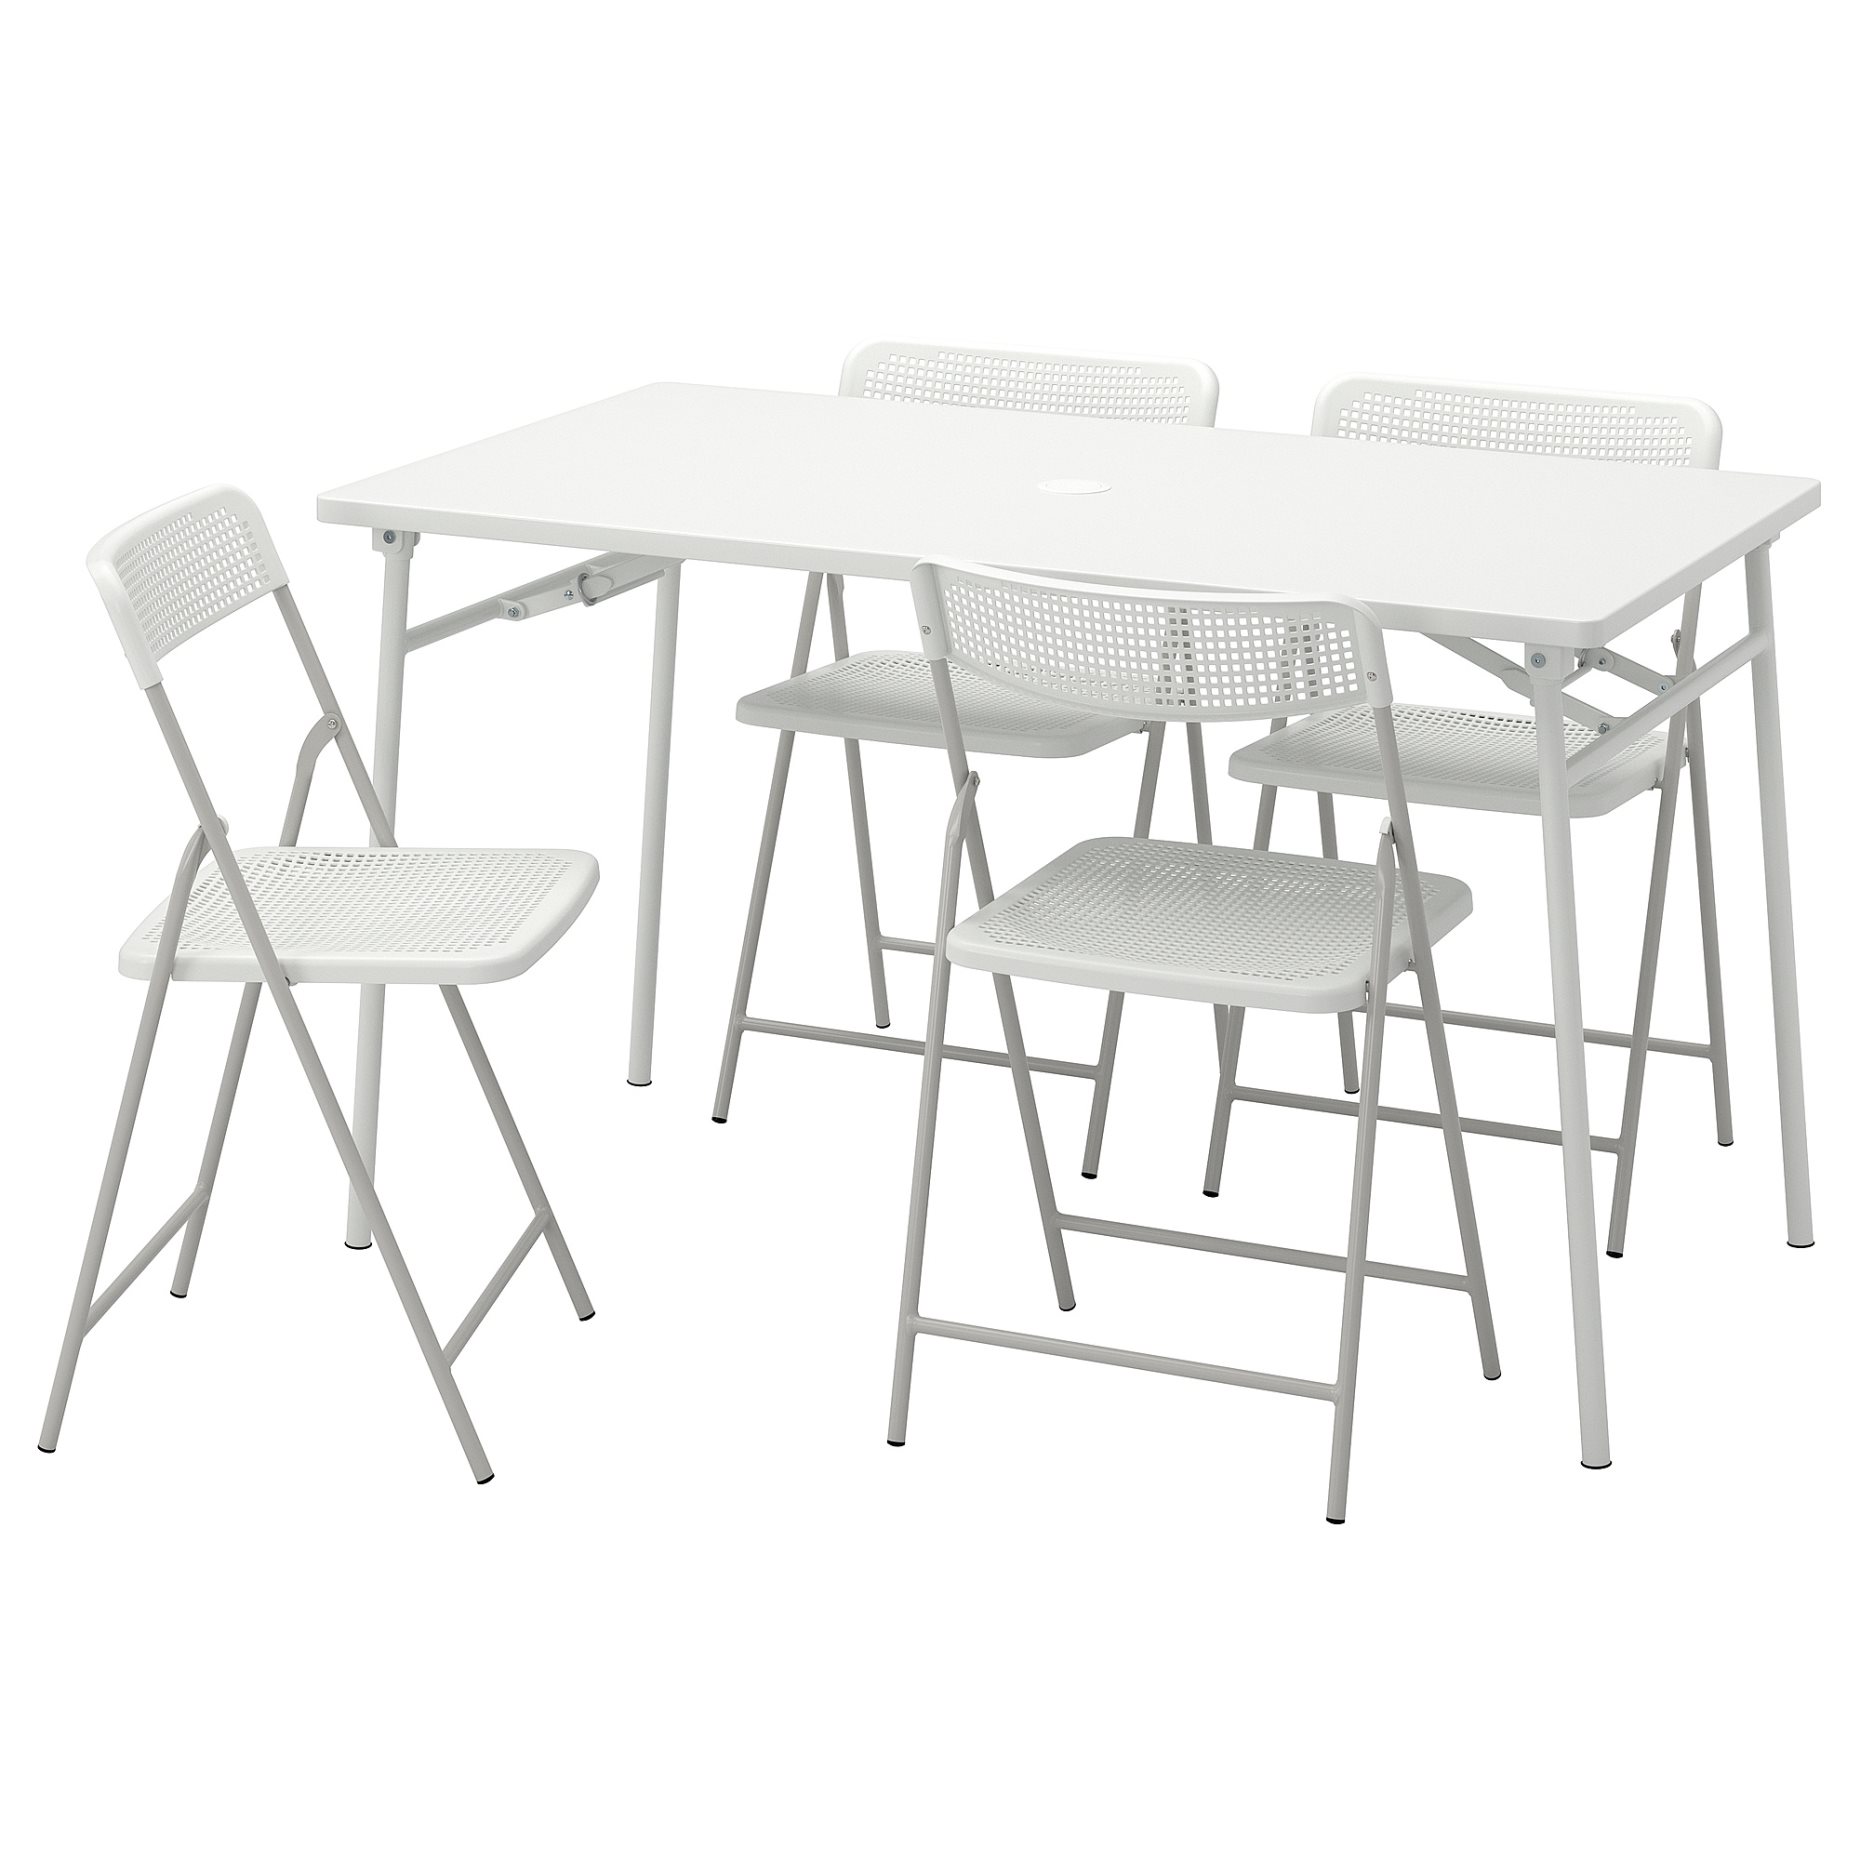 TORPARÖ, table/4 folding chairs/outdoor, 130 cm, 894.948.66